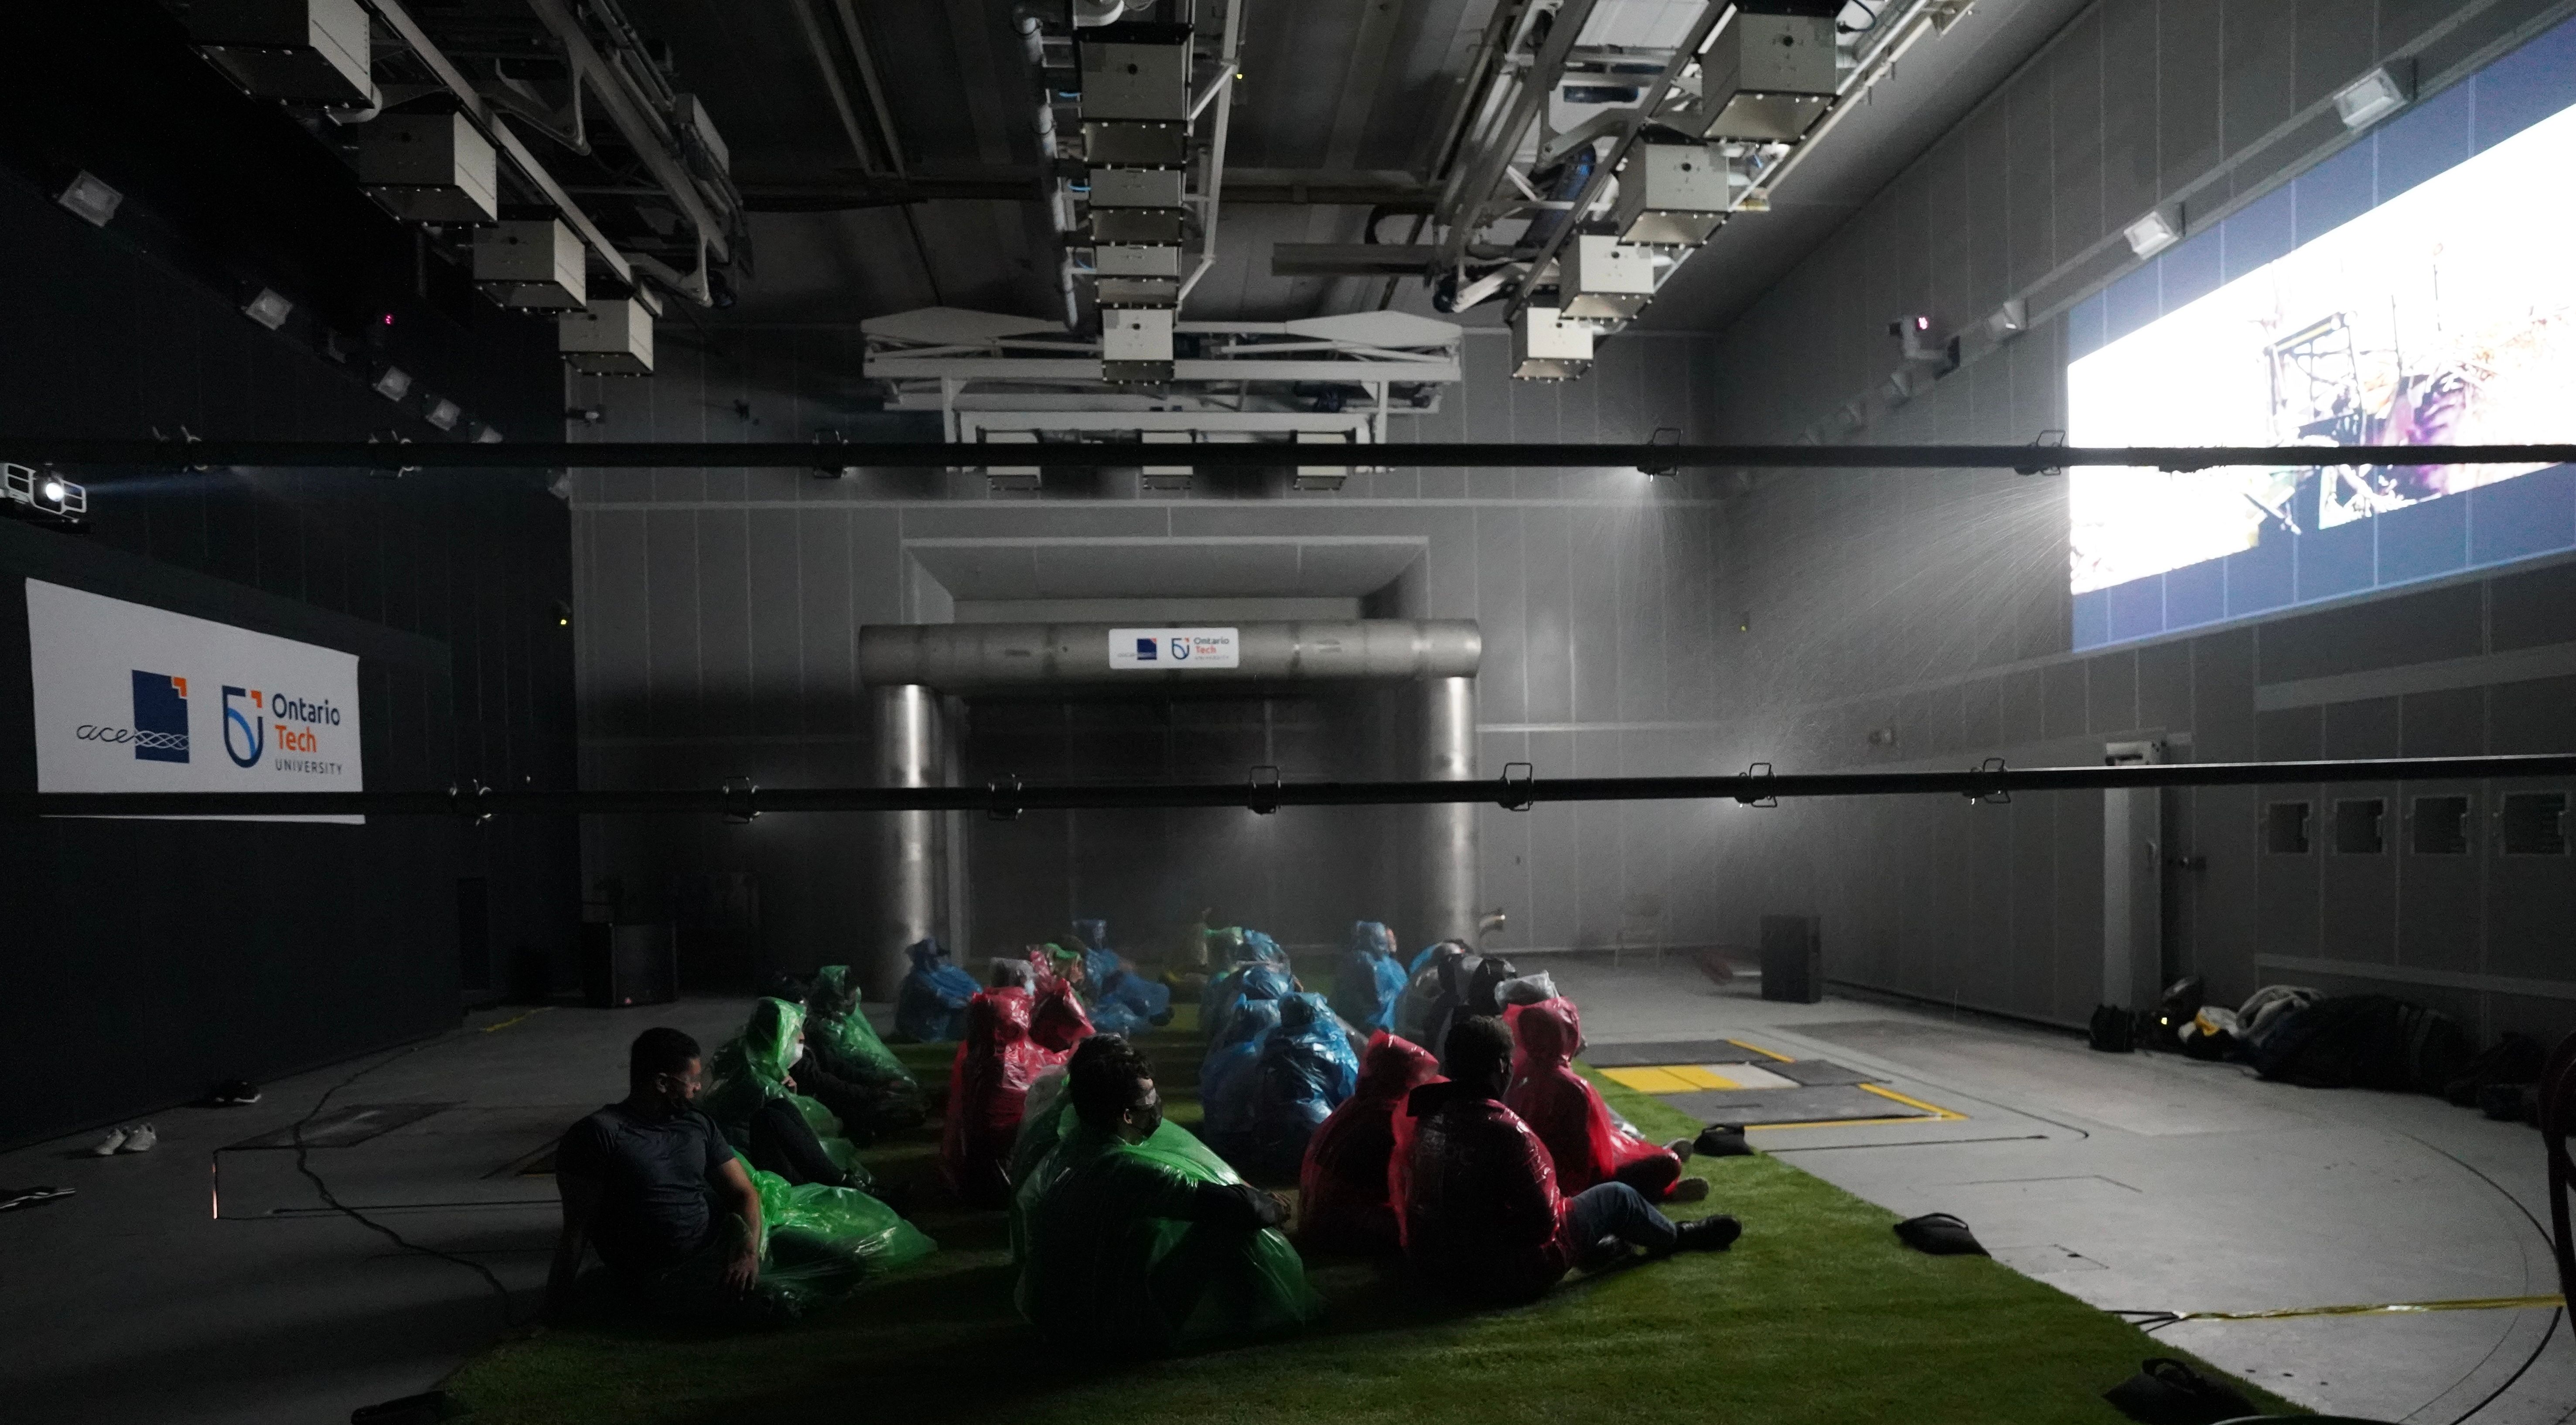 Students are watching the Twister film, sitting in the climatic wind tunnel while water is sprayed on them. ${altNumber}